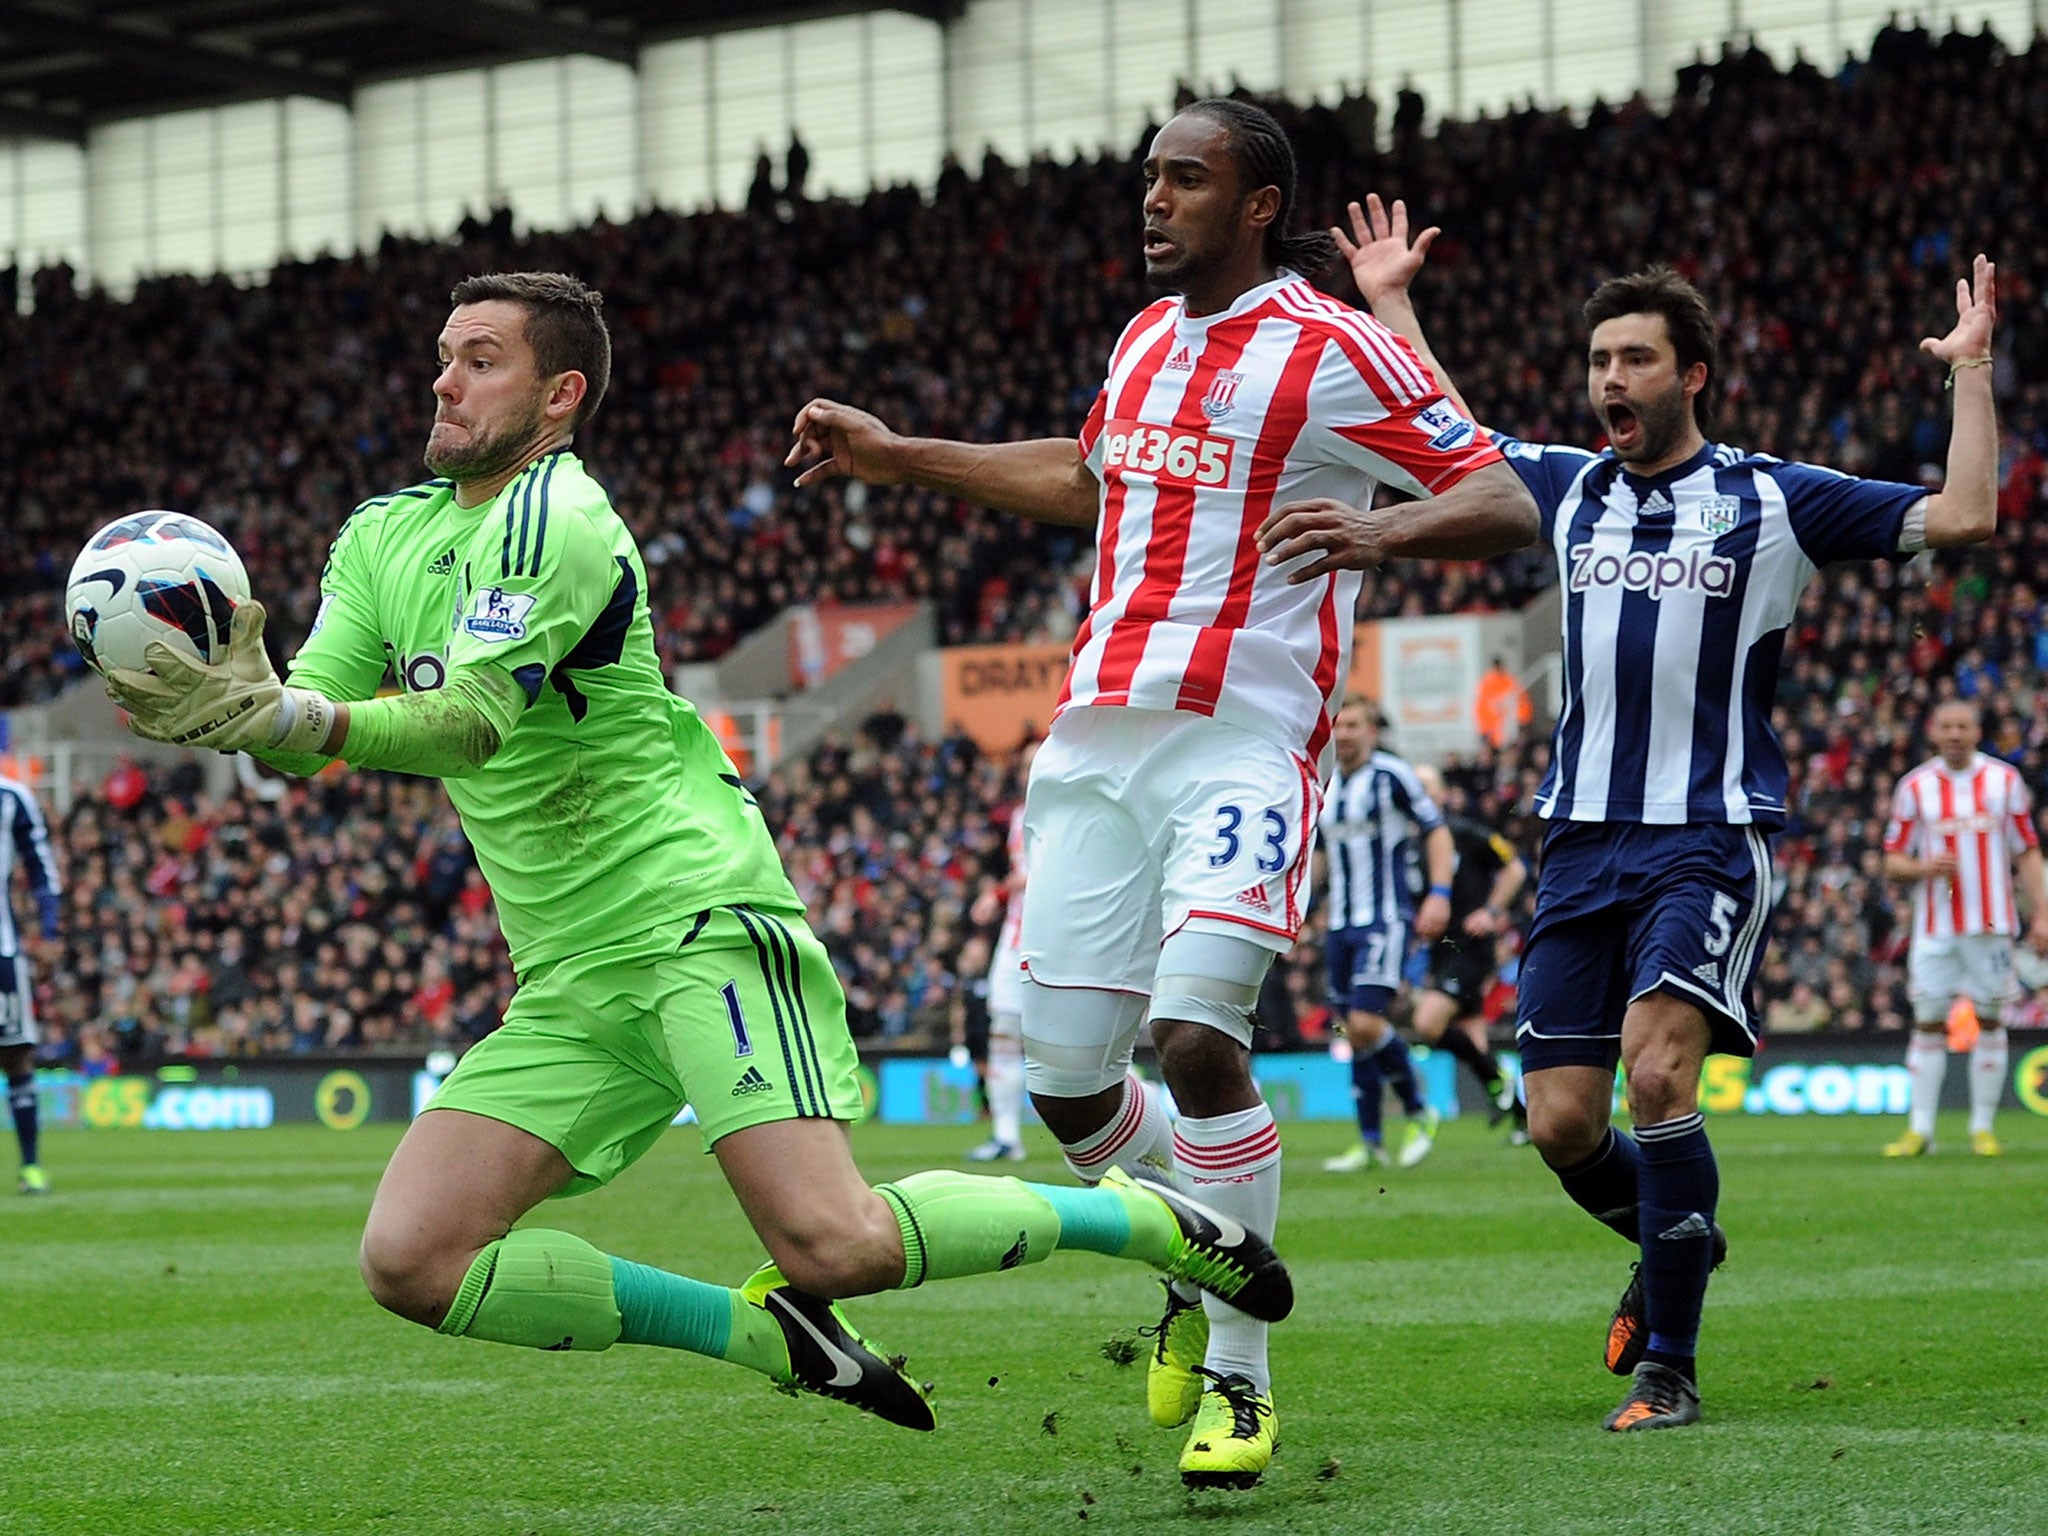 Ben Foster grabs the ball as Stoke’s Cameron Jerome closes in